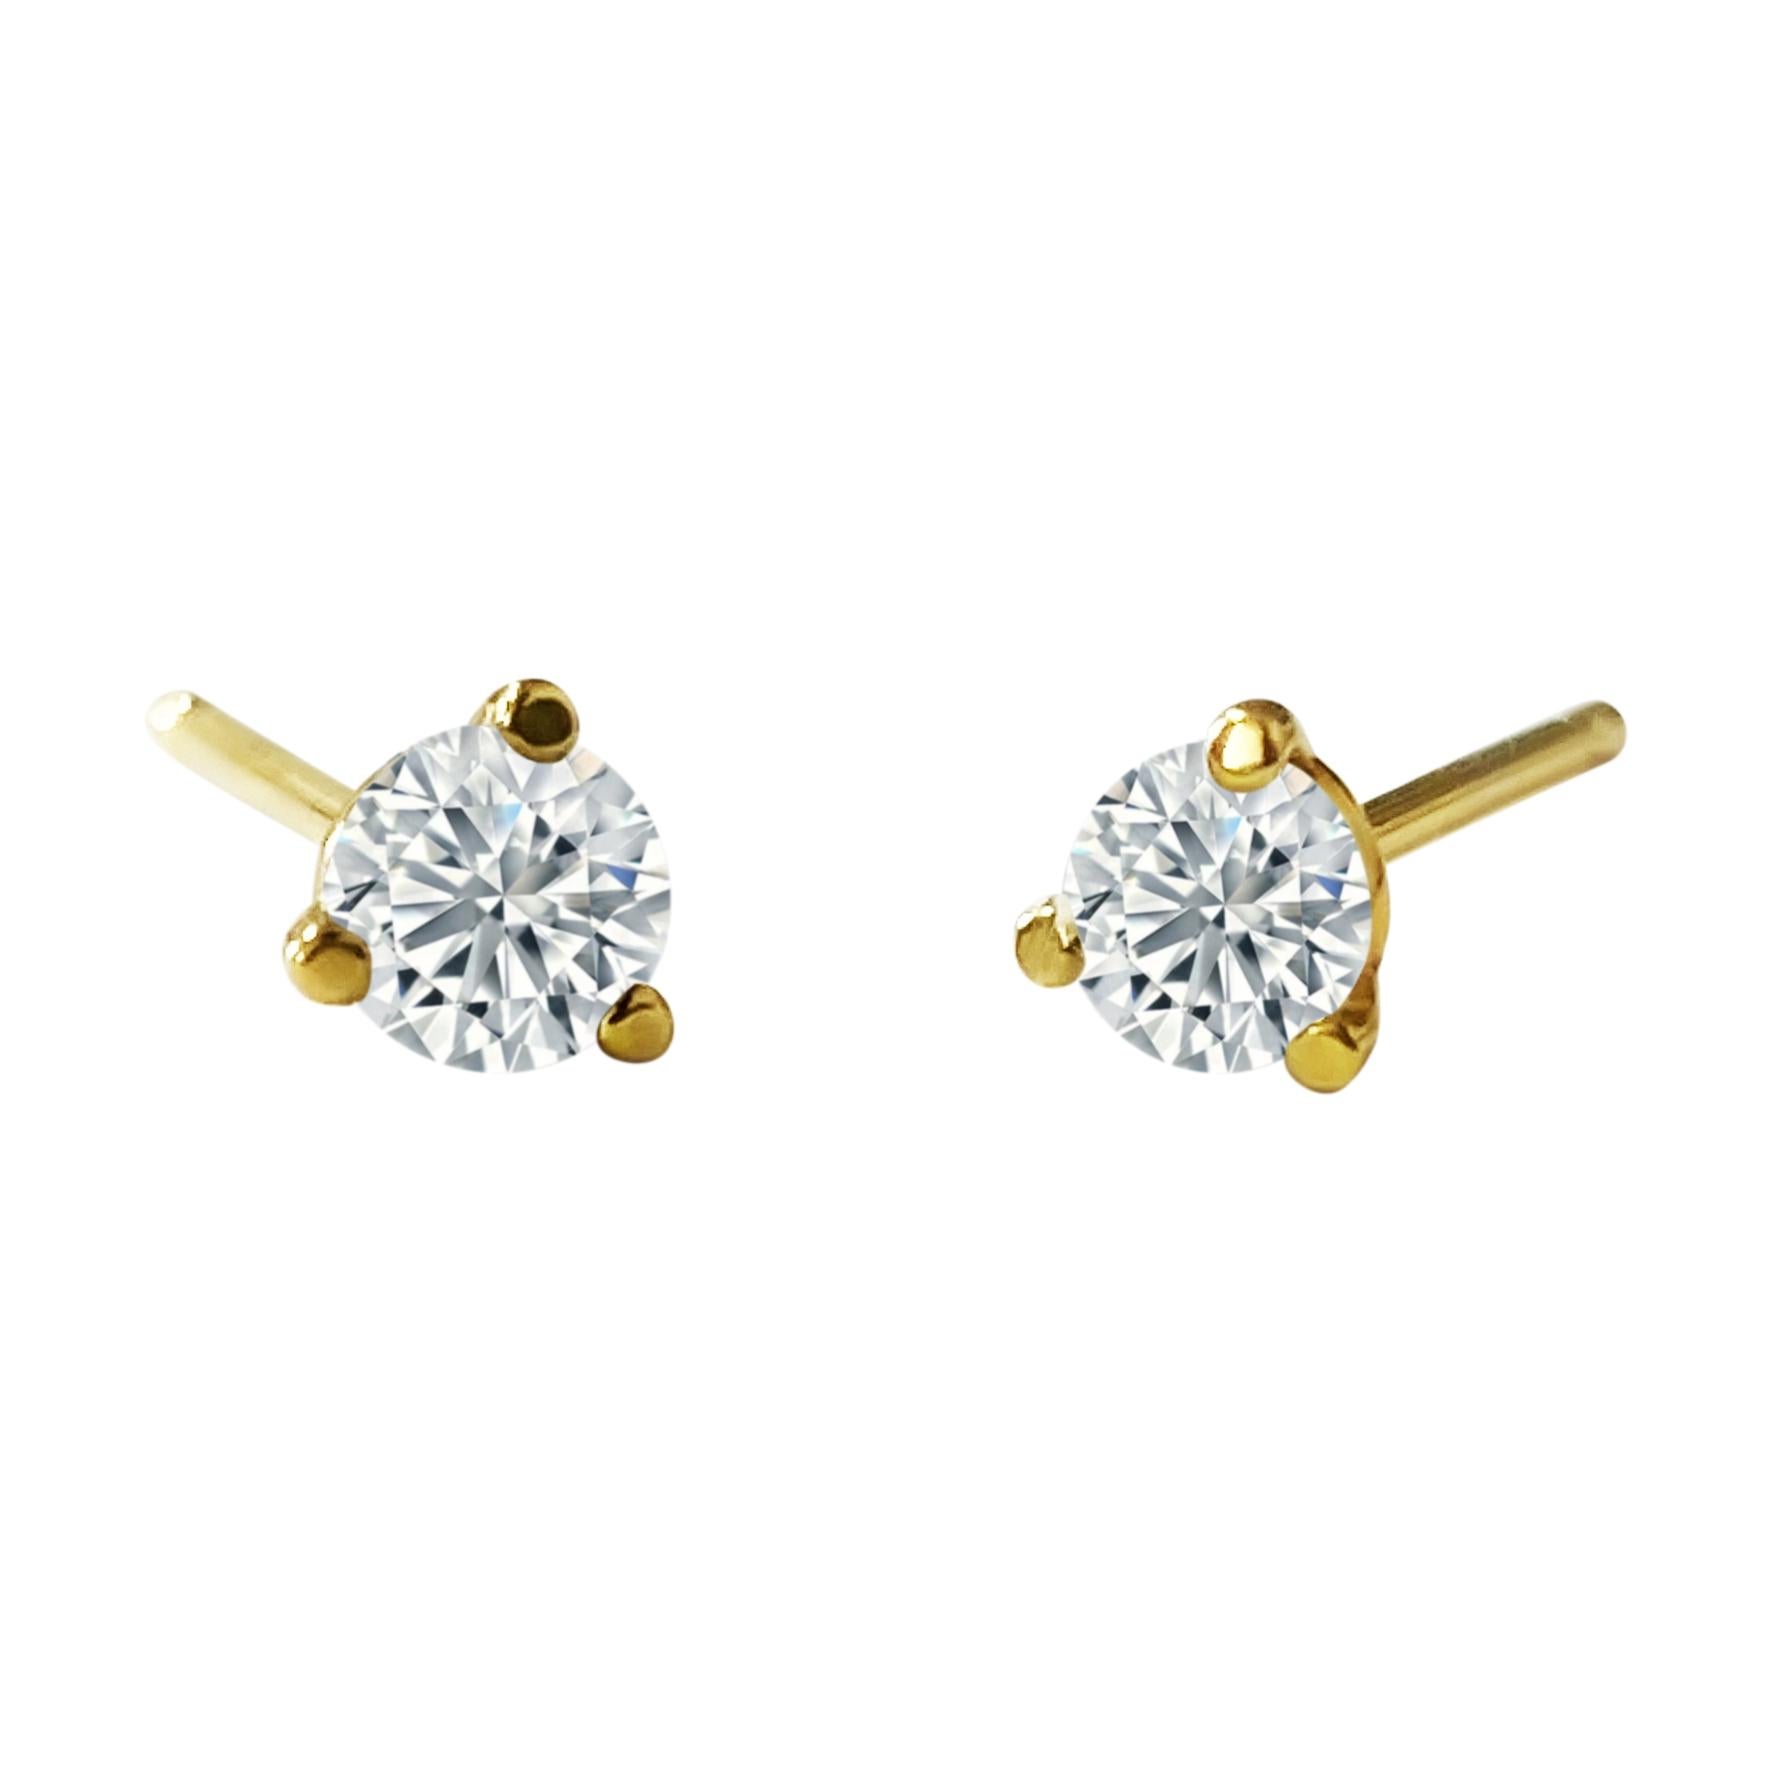 Crafted from 14k yellow gold, these classic martini-style diamond stud earrings feature 0.30 carats of round brilliant cut diamonds with G-H color and I2-I3 clarity. Perfect for adding elegance to any ensemble.

Key Features:

Metal: 14k yellow